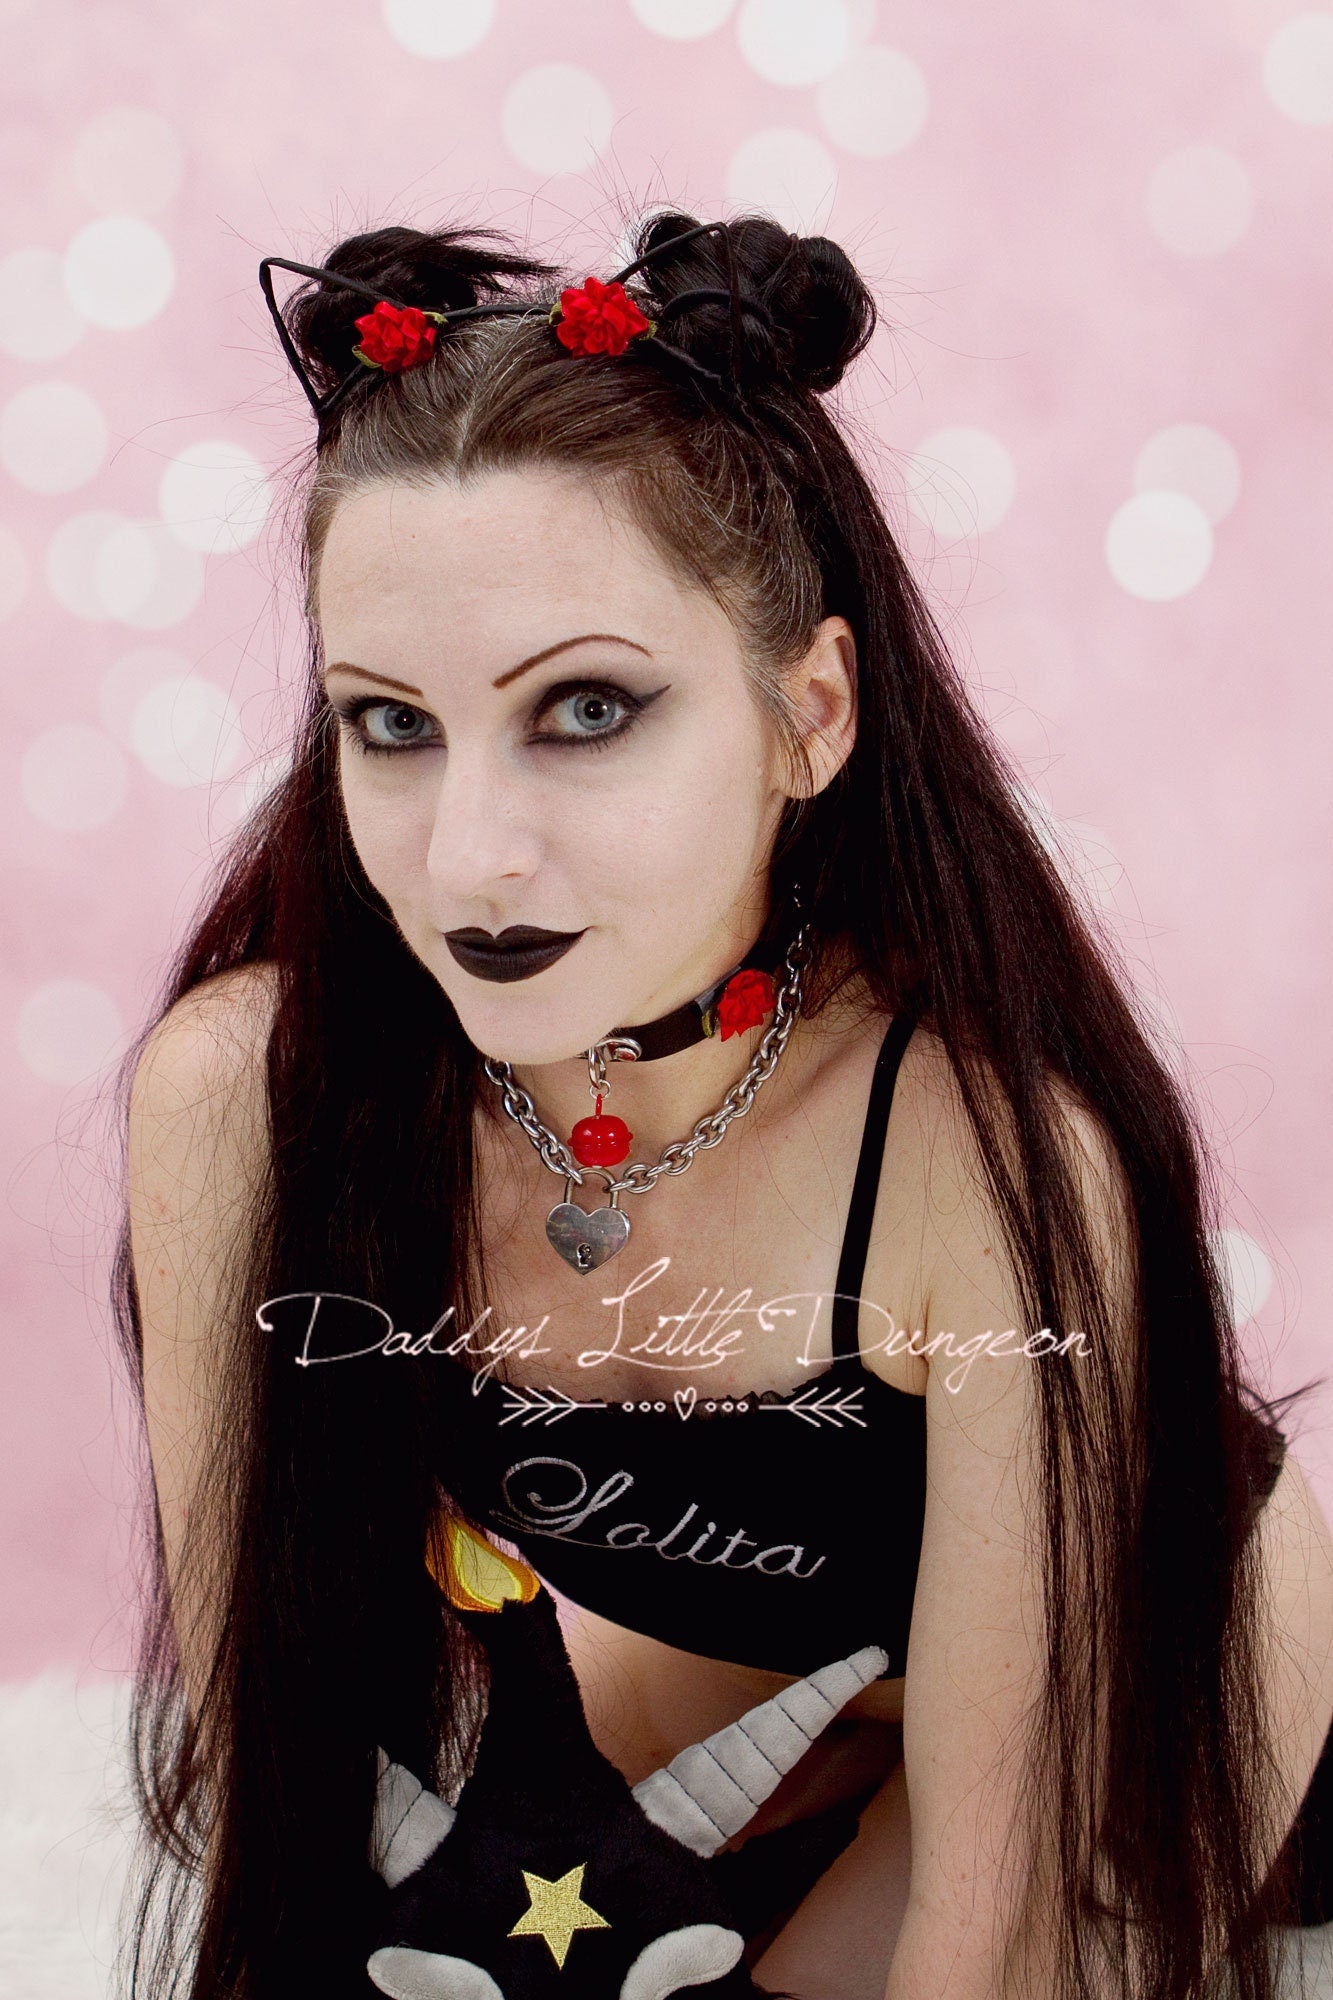 BDSM DDLG Pretty Gothic Custom Personalized Baby Girl Sir's Kitten Bunny Day Collar Choker Pet Play Kitty Sub Daddys Little ABDL mature